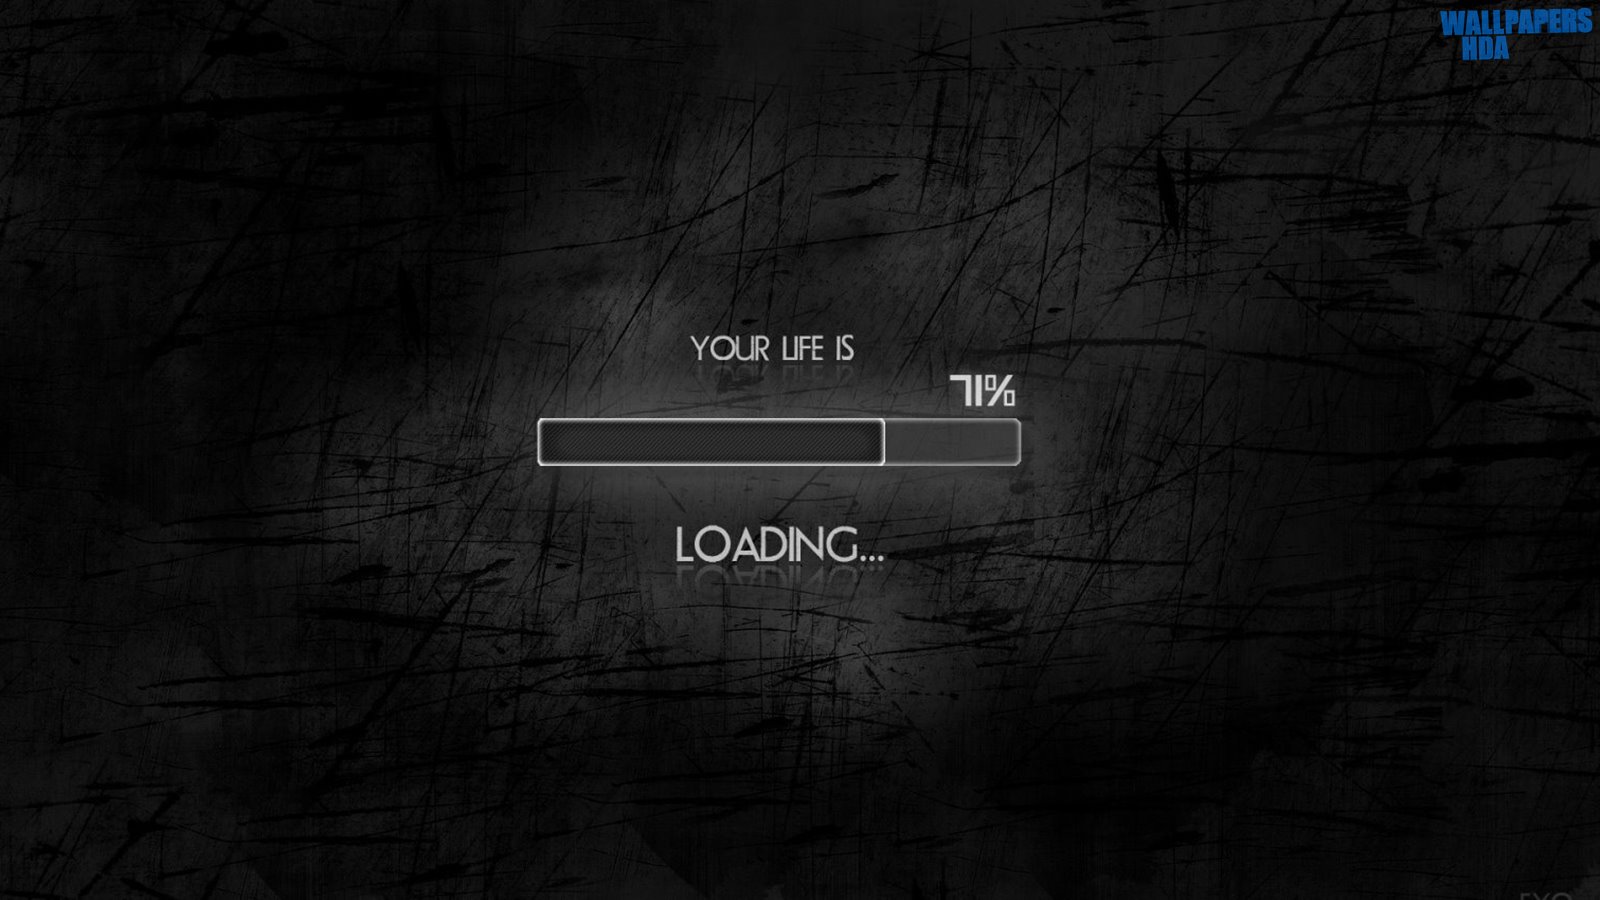 Your life is loading wallpaper 1600x900